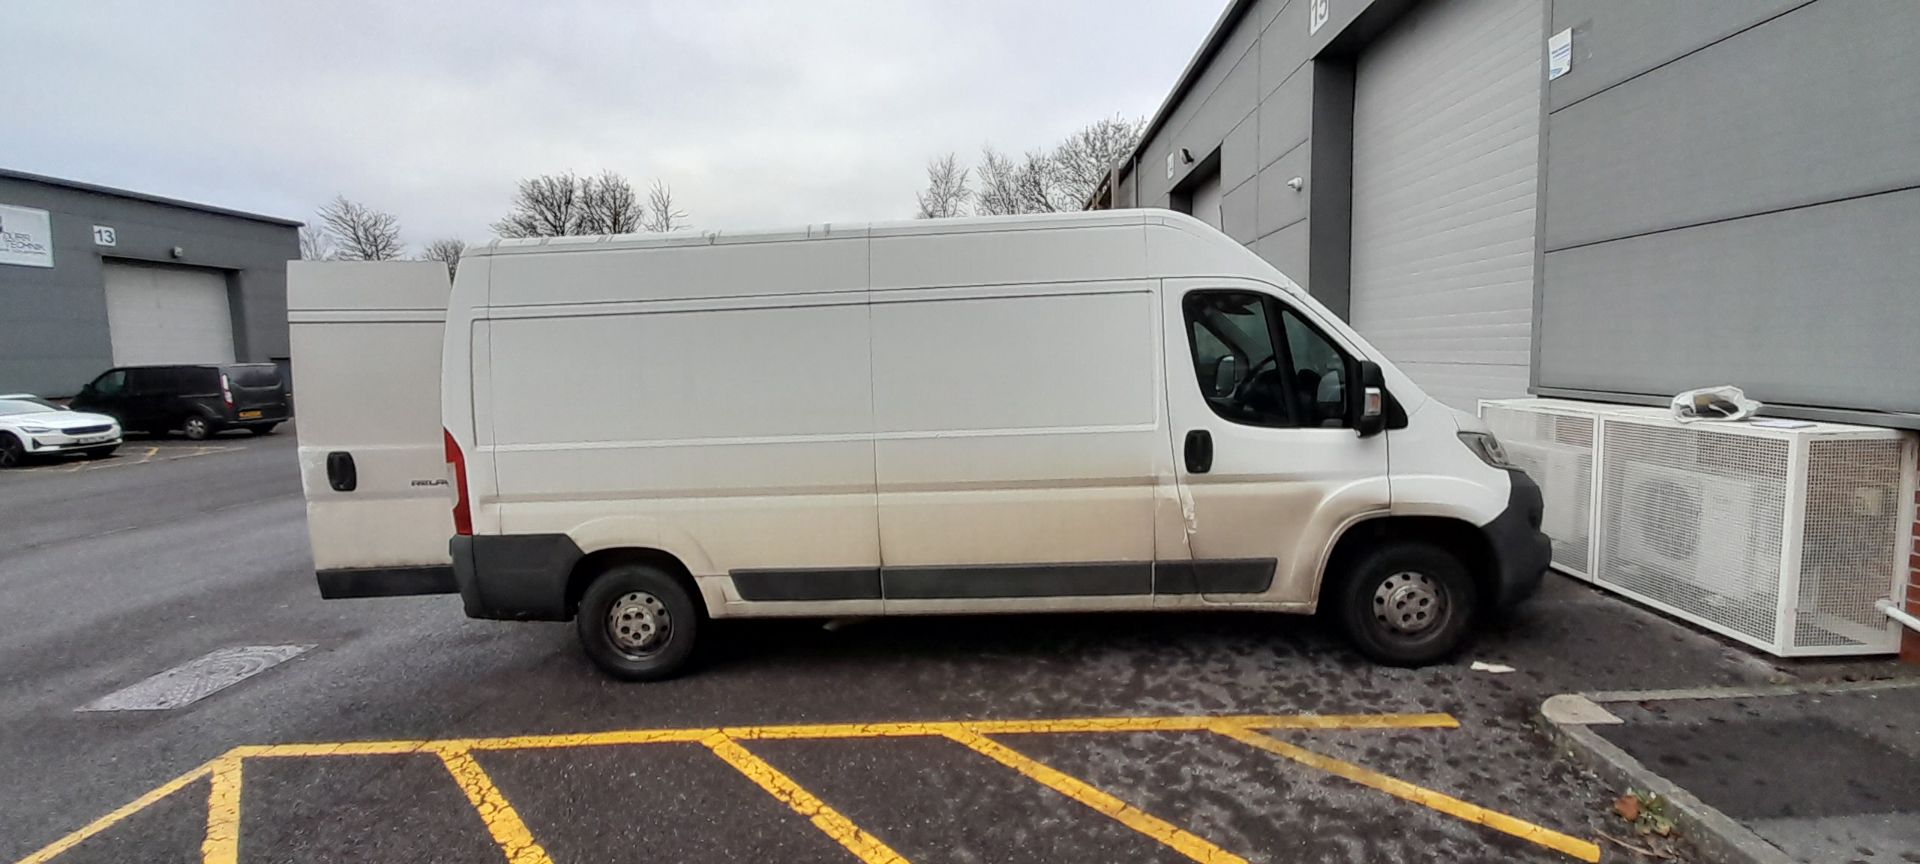 Citroen Relay Registration BT64 XCM, 104,109 miles - This vehicle does not have a V5C Document, the - Image 2 of 11